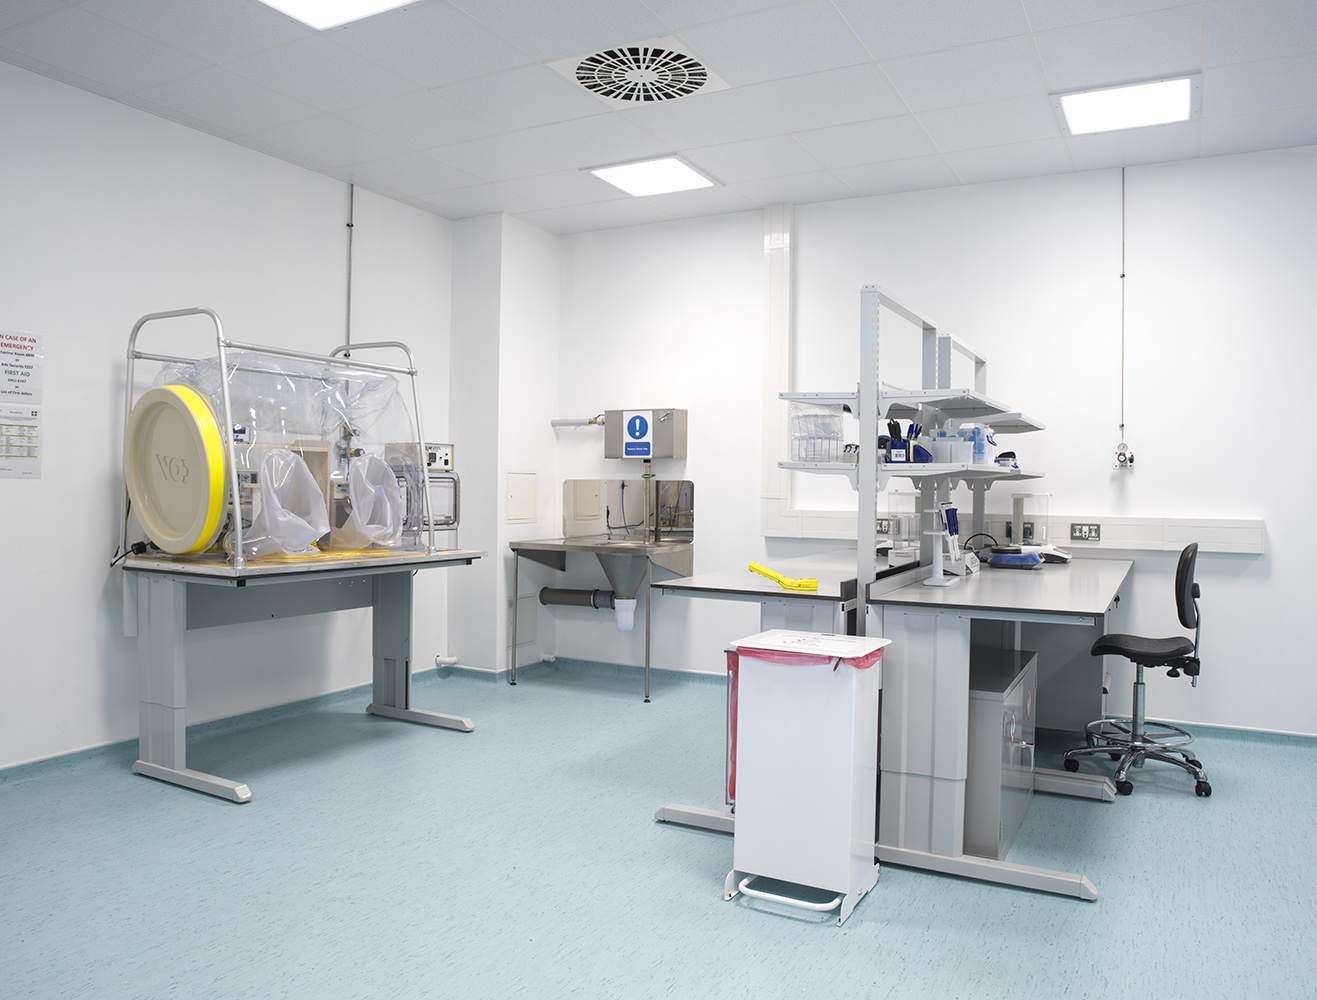 New Active Materials Lab opens at Harwell